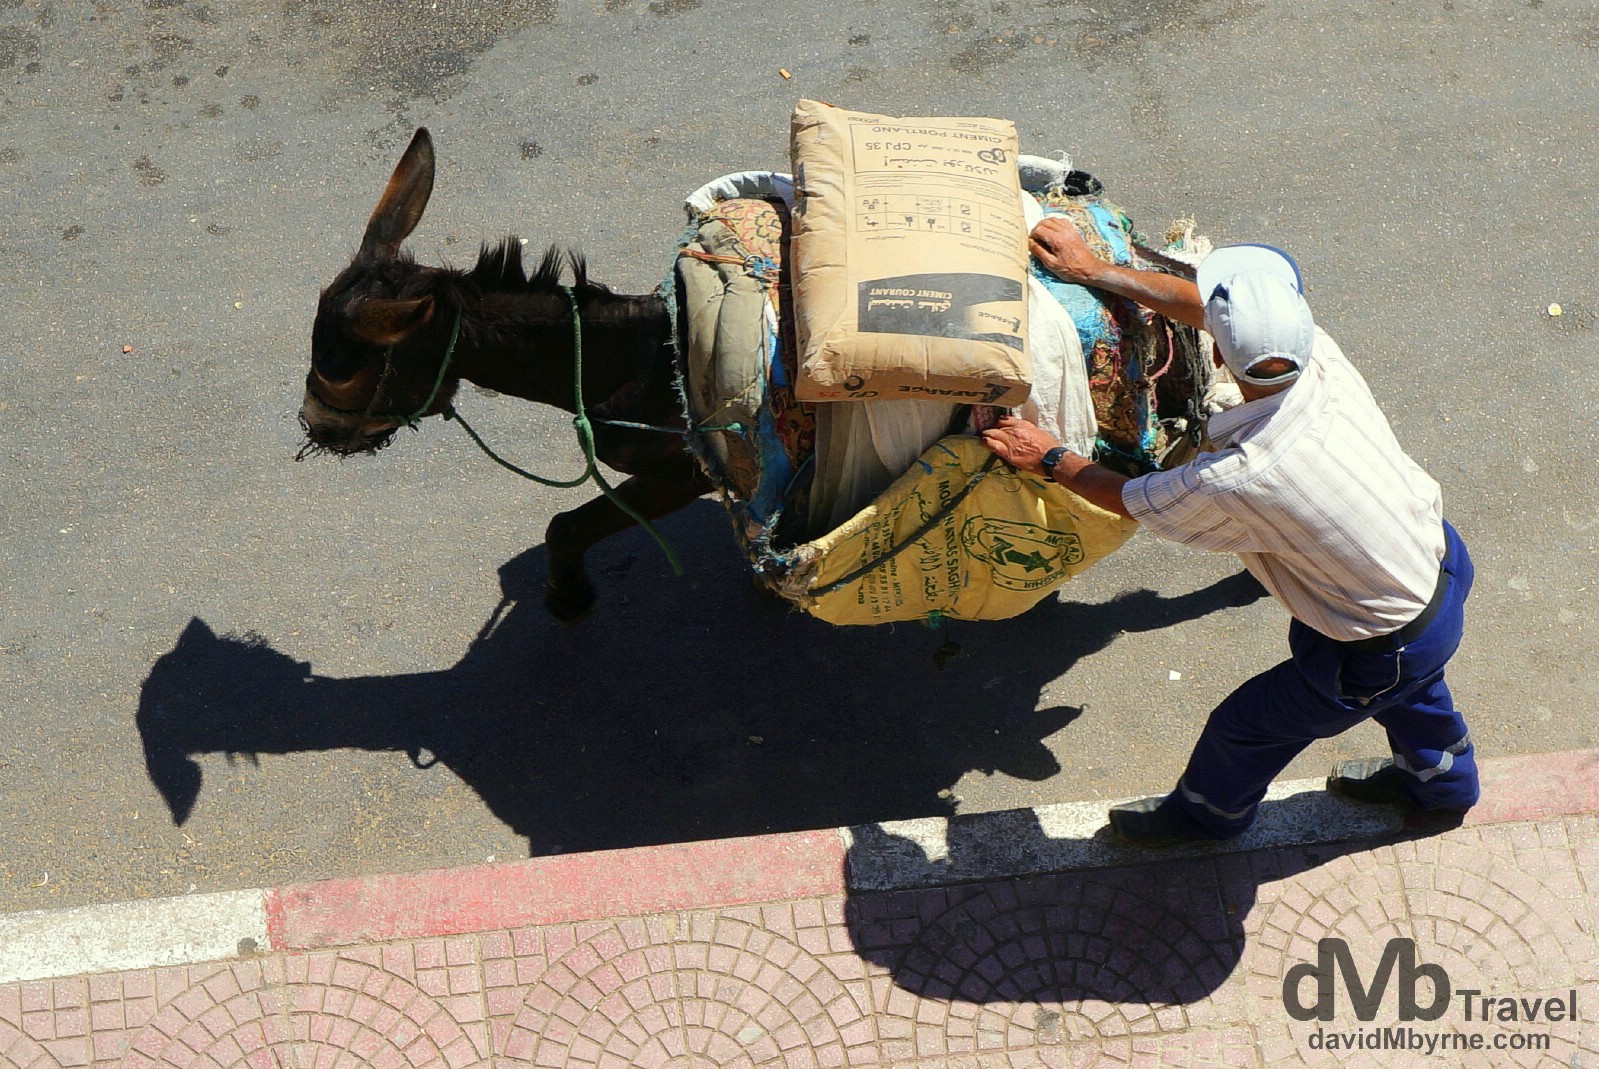 A beast of burden being helped along on the streets of Moulay Idriss, northern Morocco. May 25th, 2014.